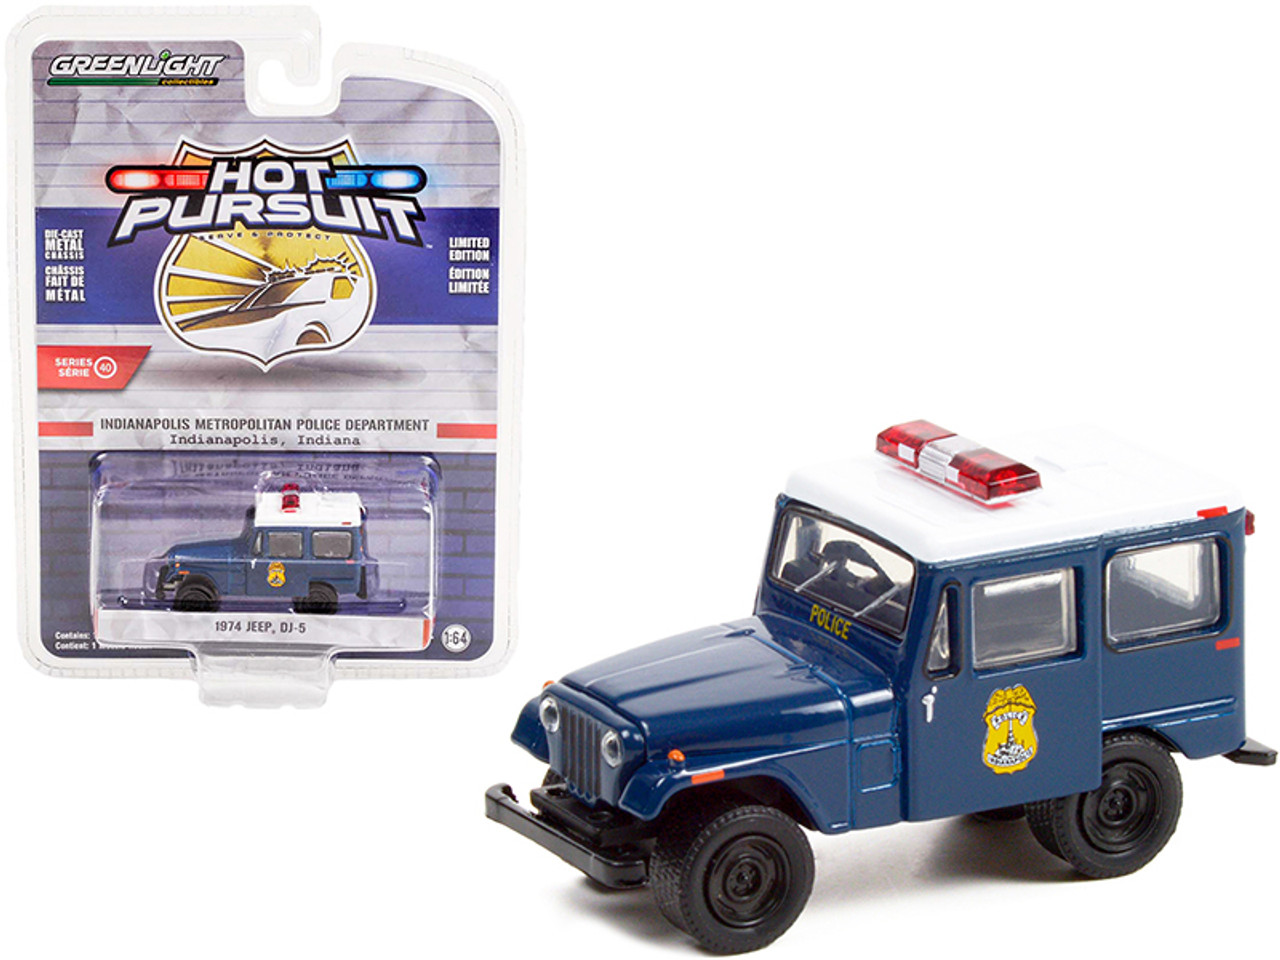 1974 Jeep DJ-5 Dark Blue with White Top "Indianapolis Metropolitan Police Department" (Indiana) "Hot Pursuit" Series 40 1/64 Diecast Model Car by Greenlight